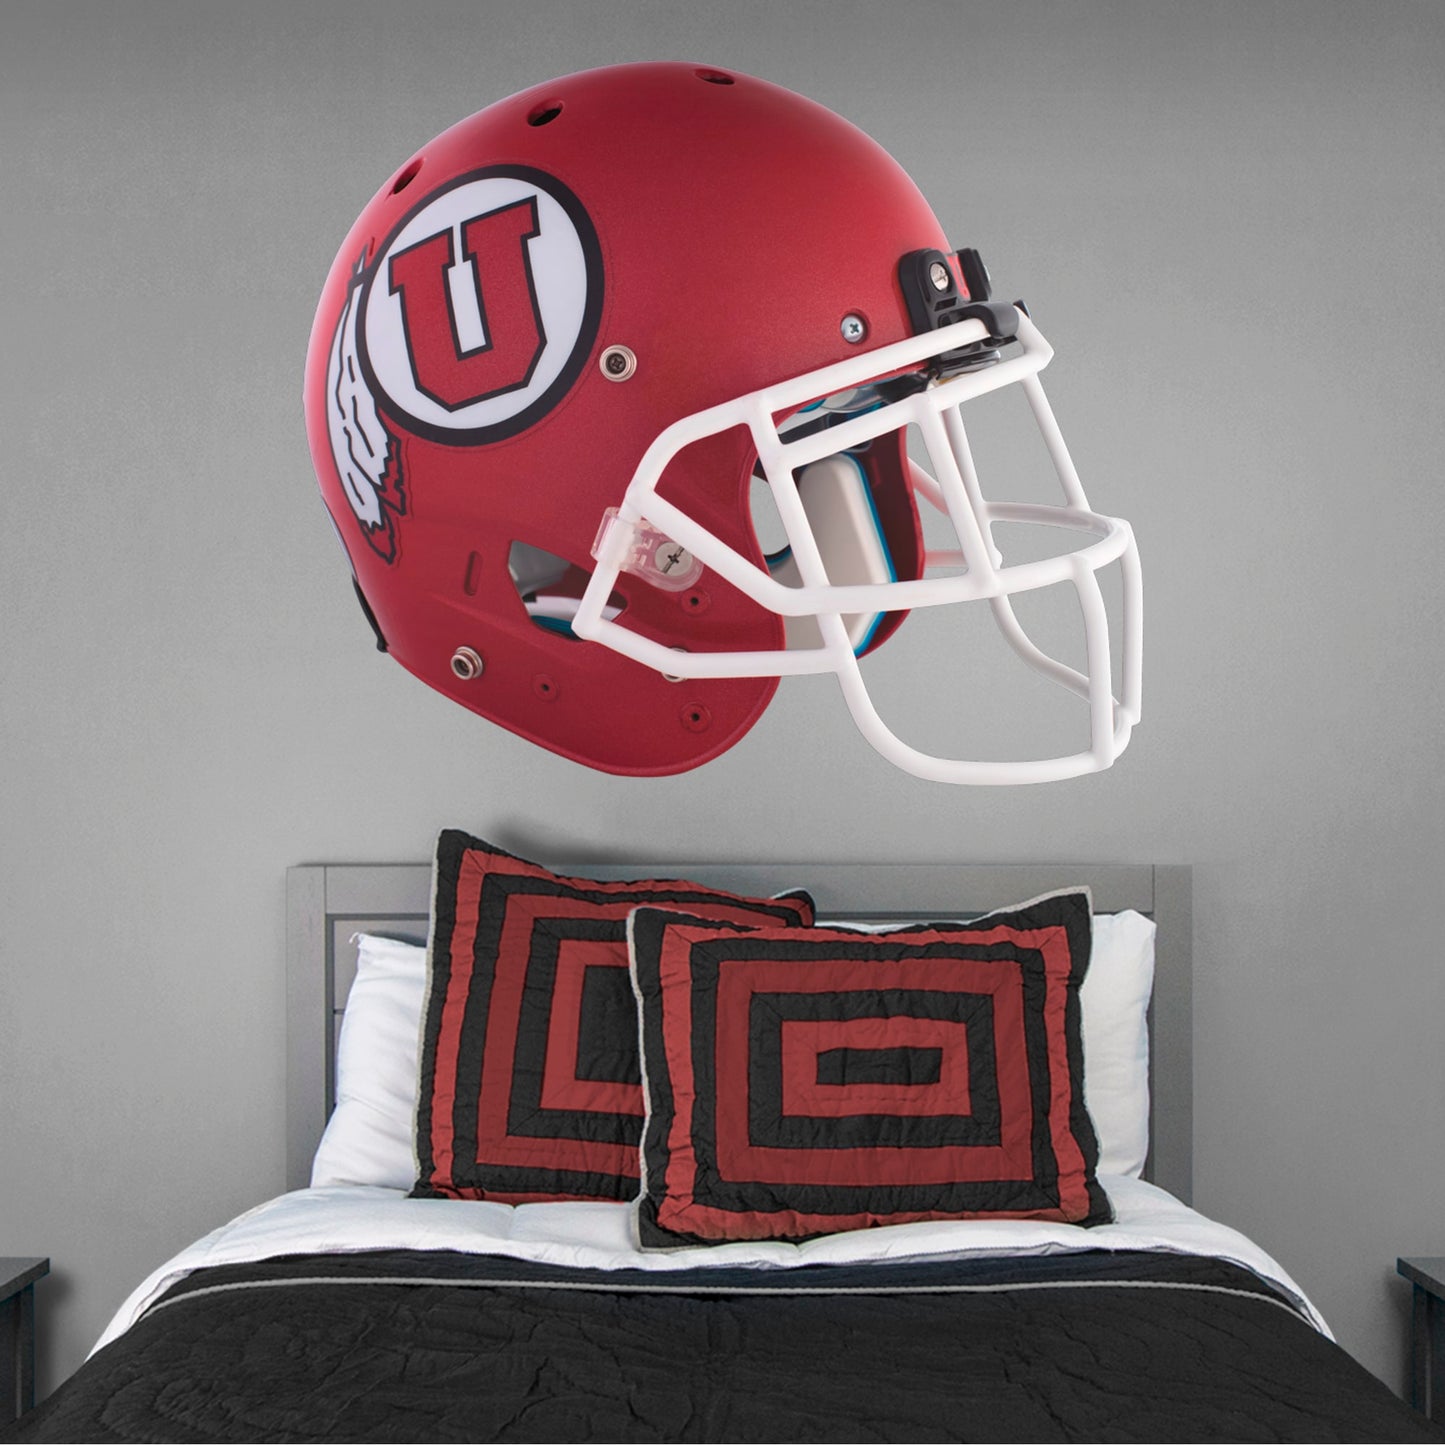 Utah Utes: Red Helmet - Officially Licensed Removable Wall Decal